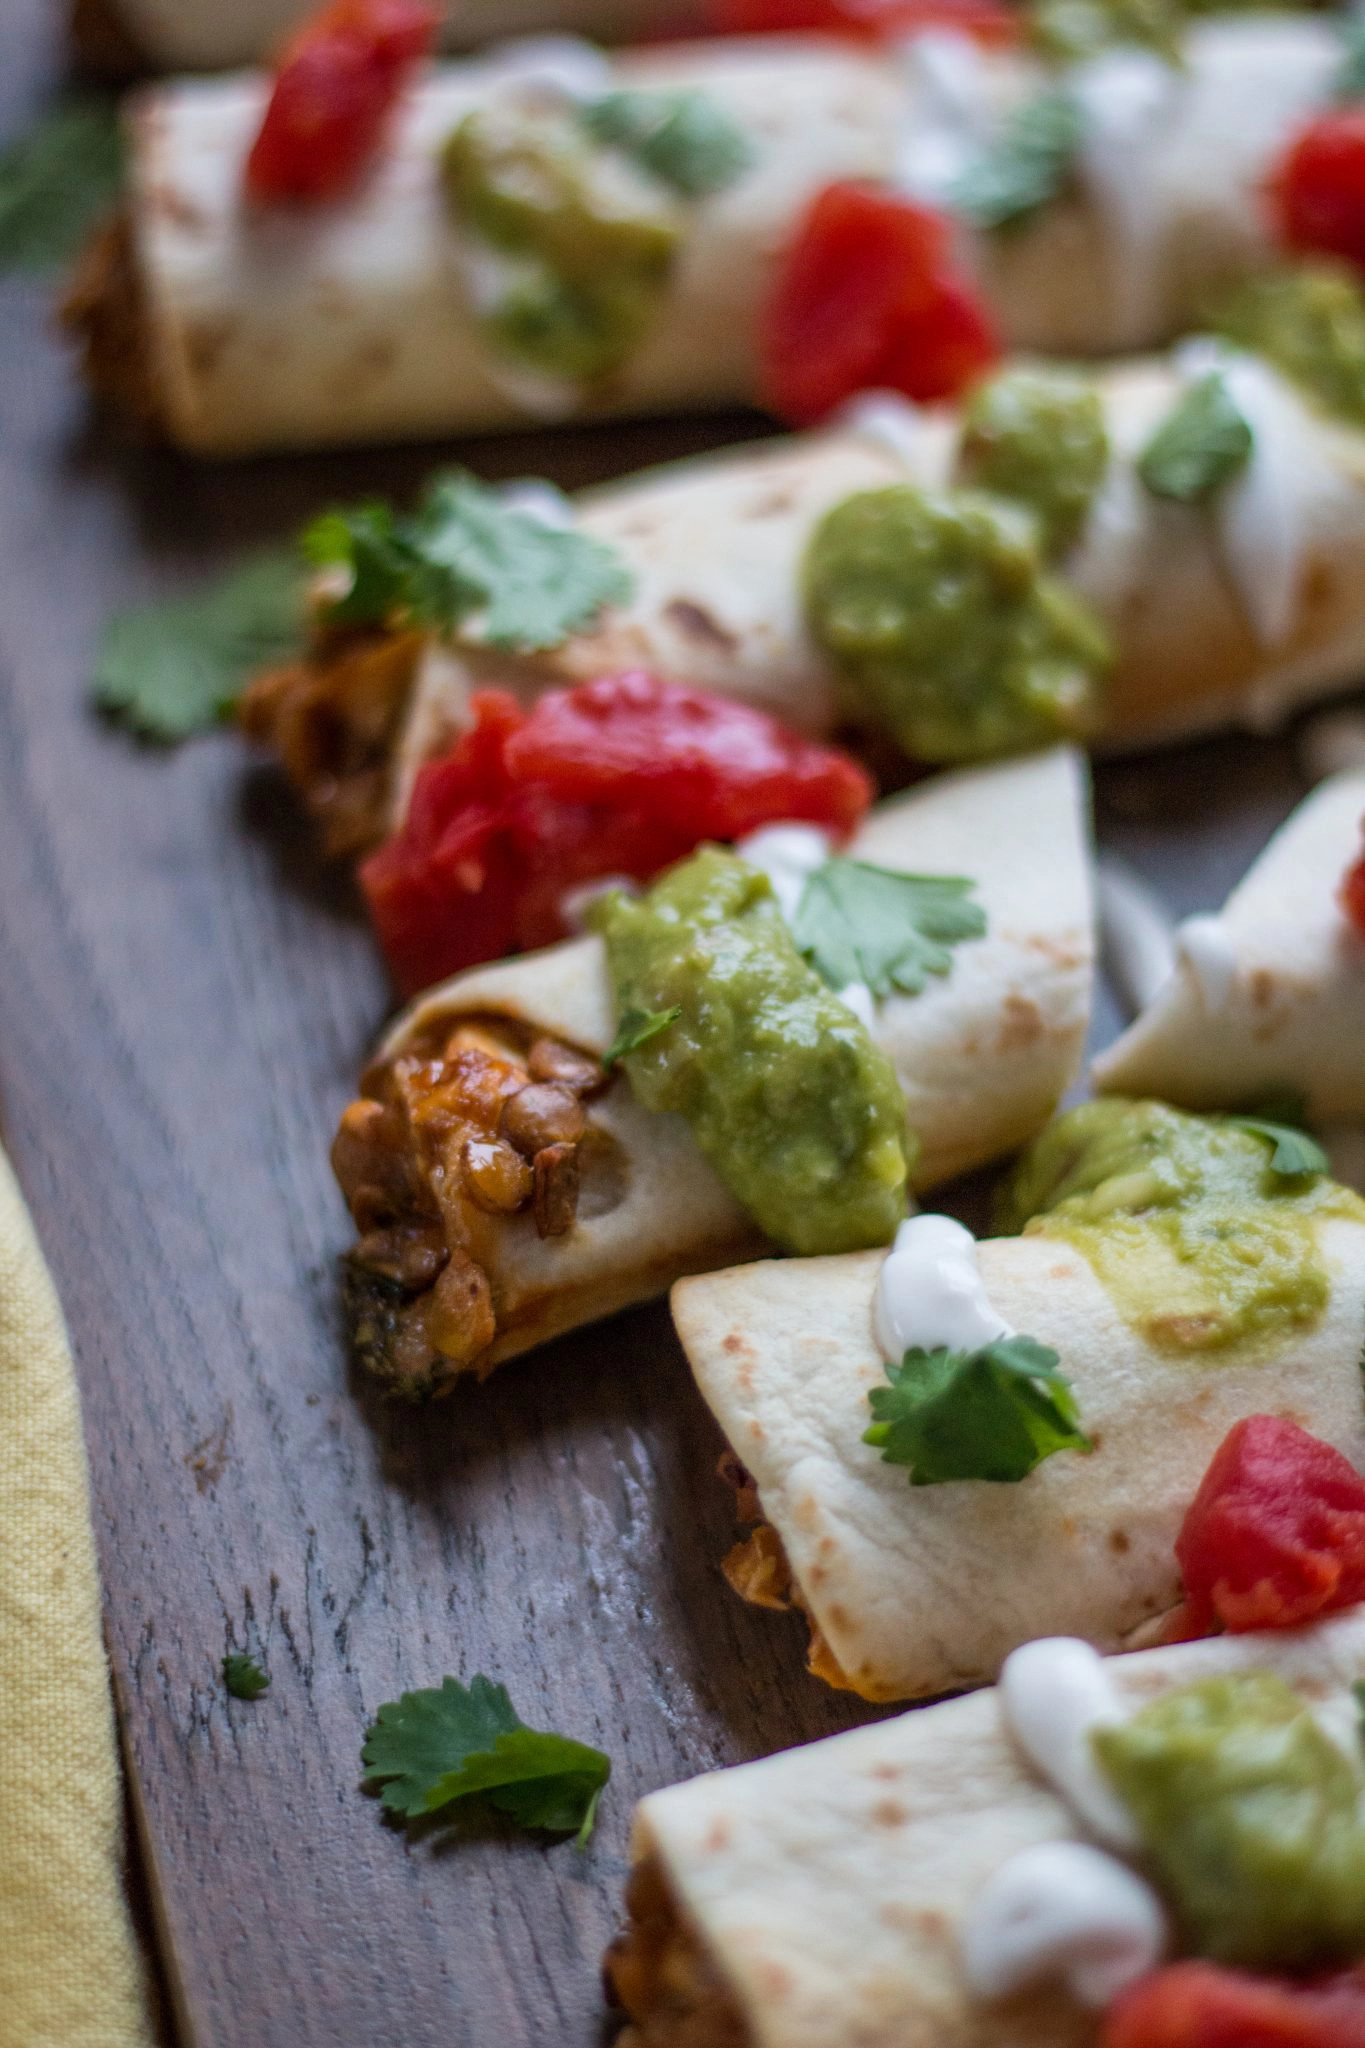 Chipotle Lentil Tasquitos on a wooden board